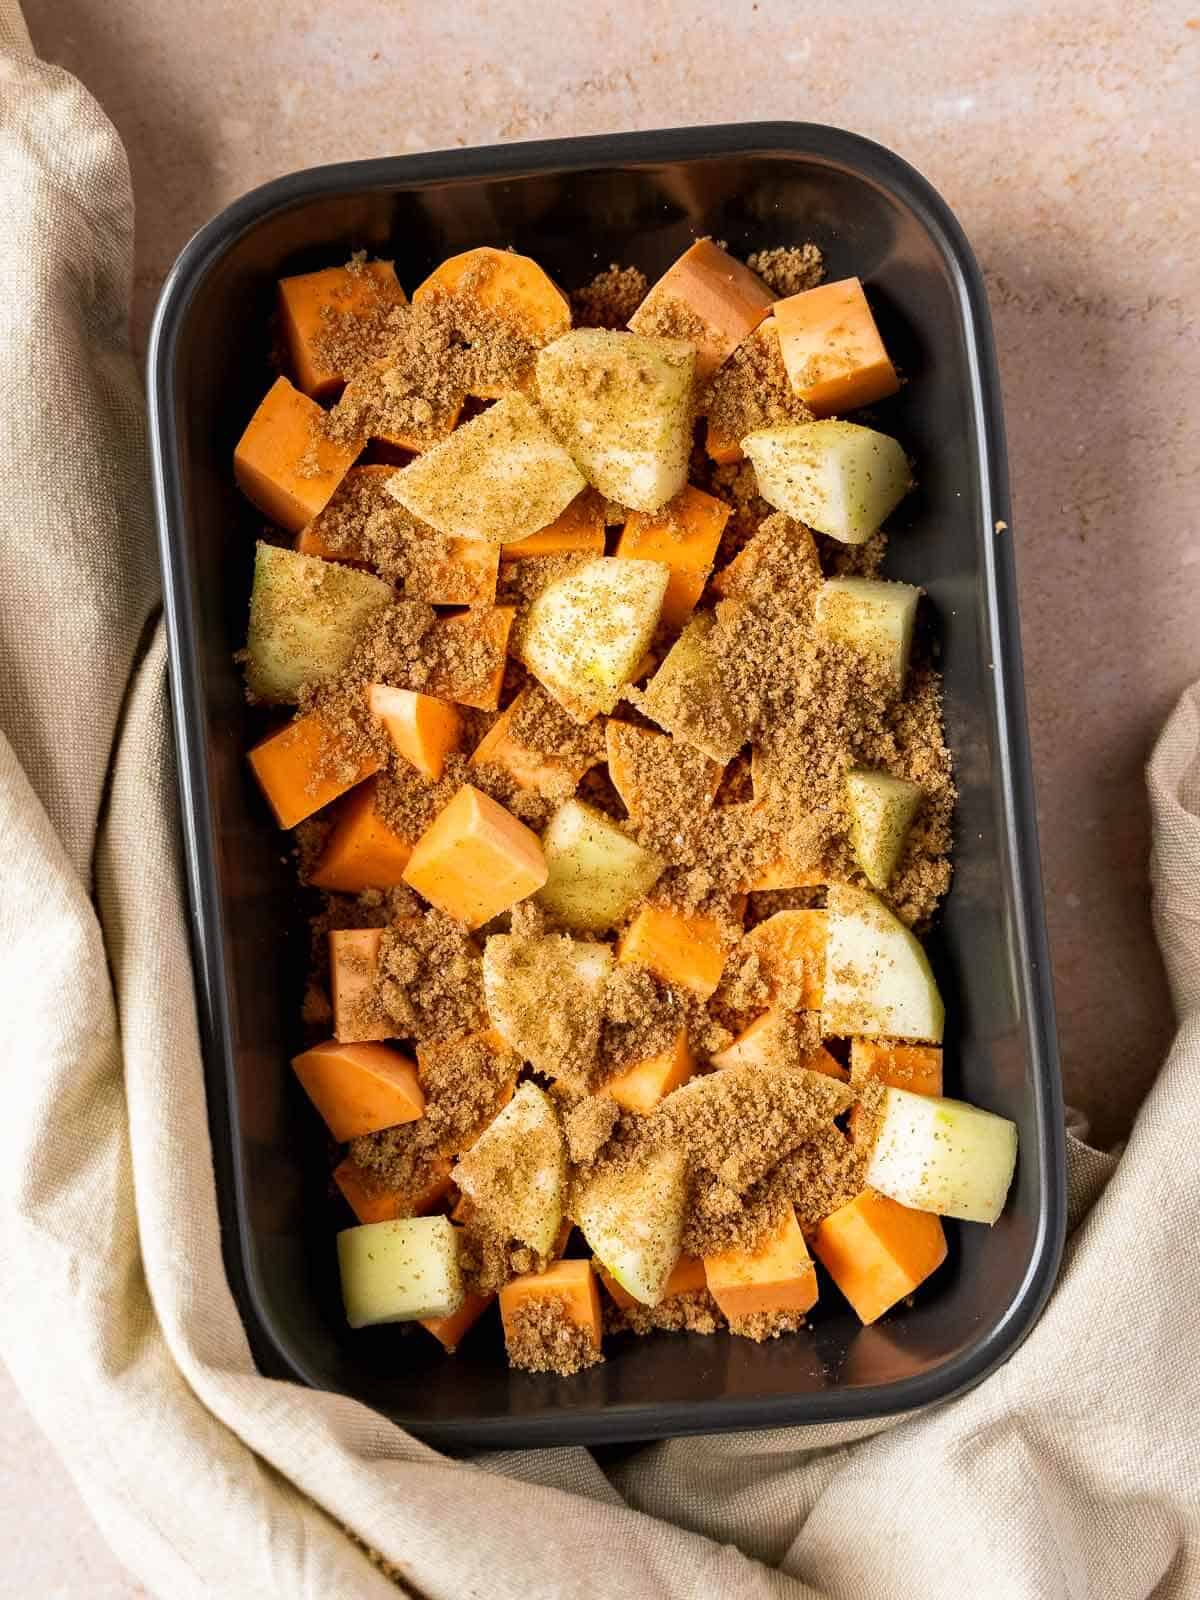 baking dish with sweet potato and apple dice covered with brown sugar and spices mixture.